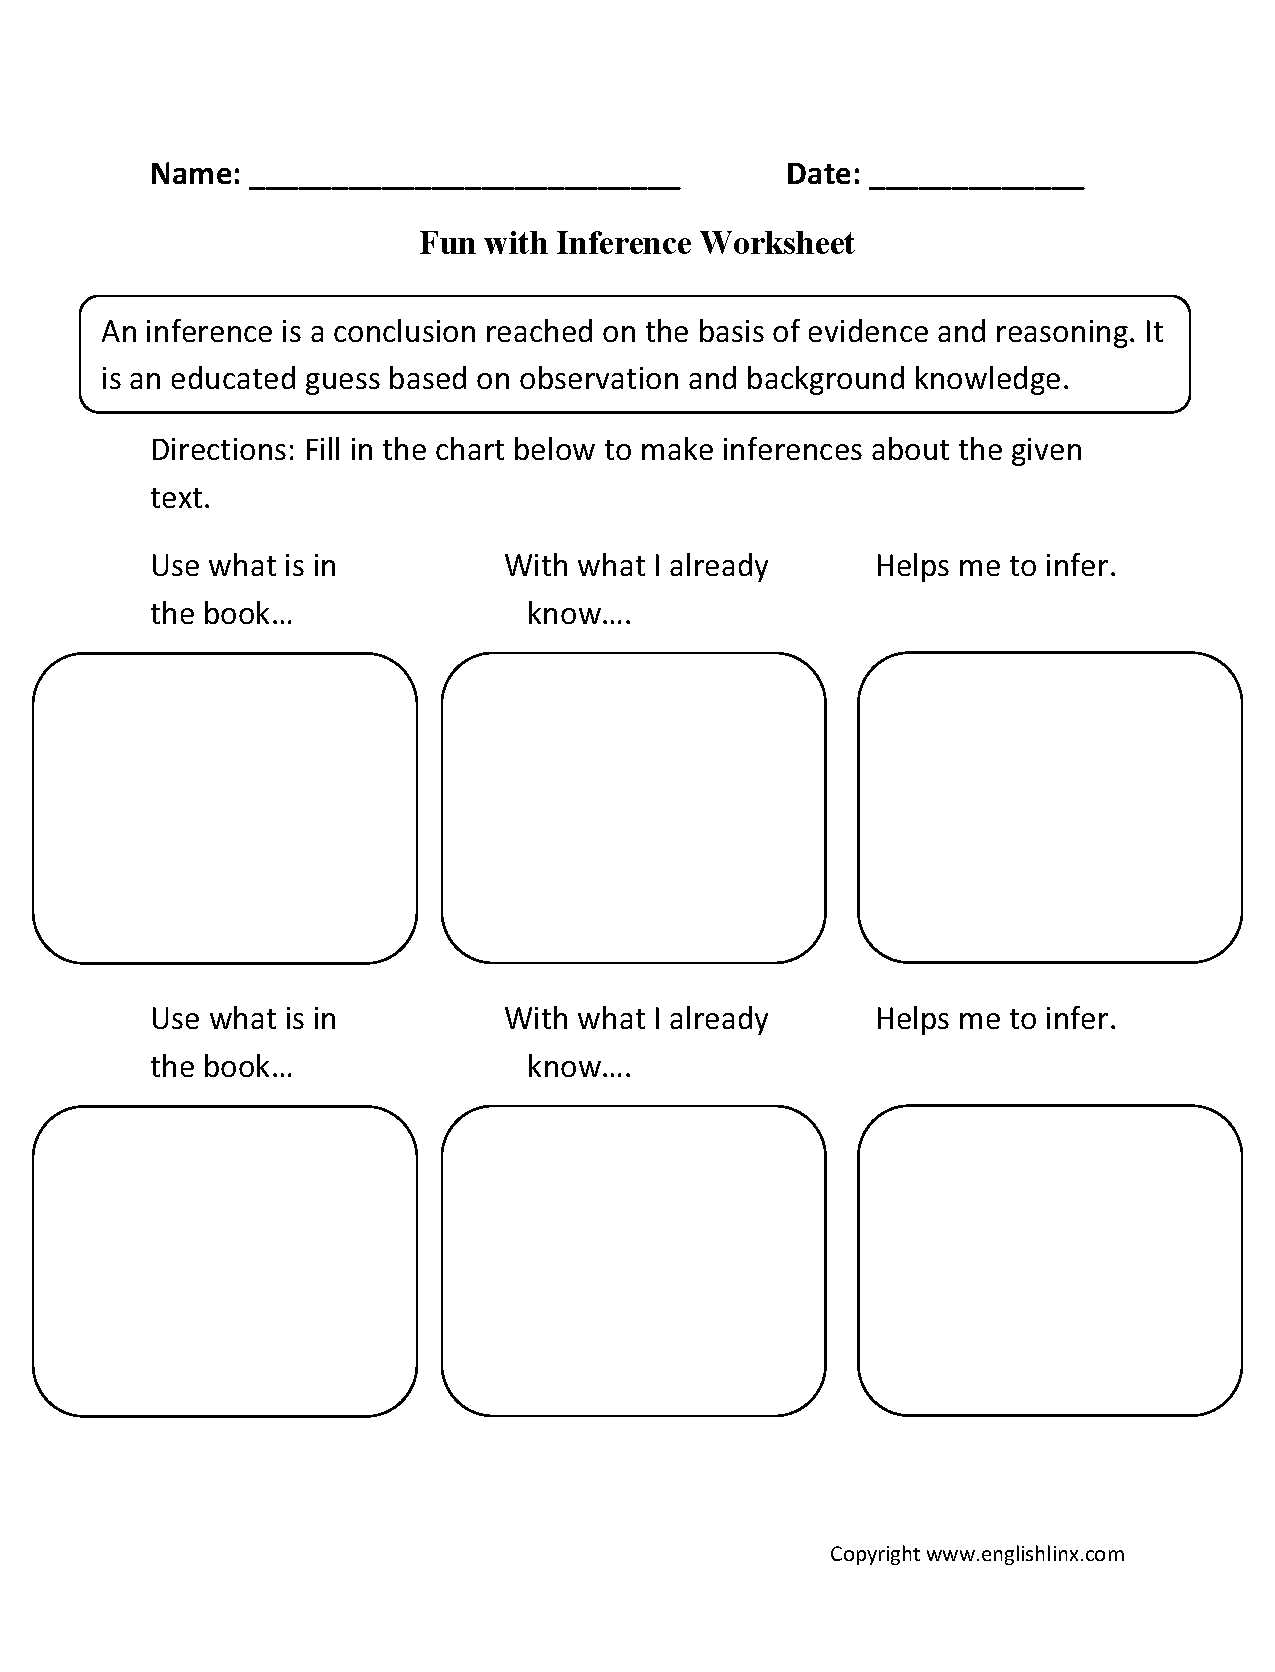 Free Nutrition Worksheets Along with Cool Worksheets